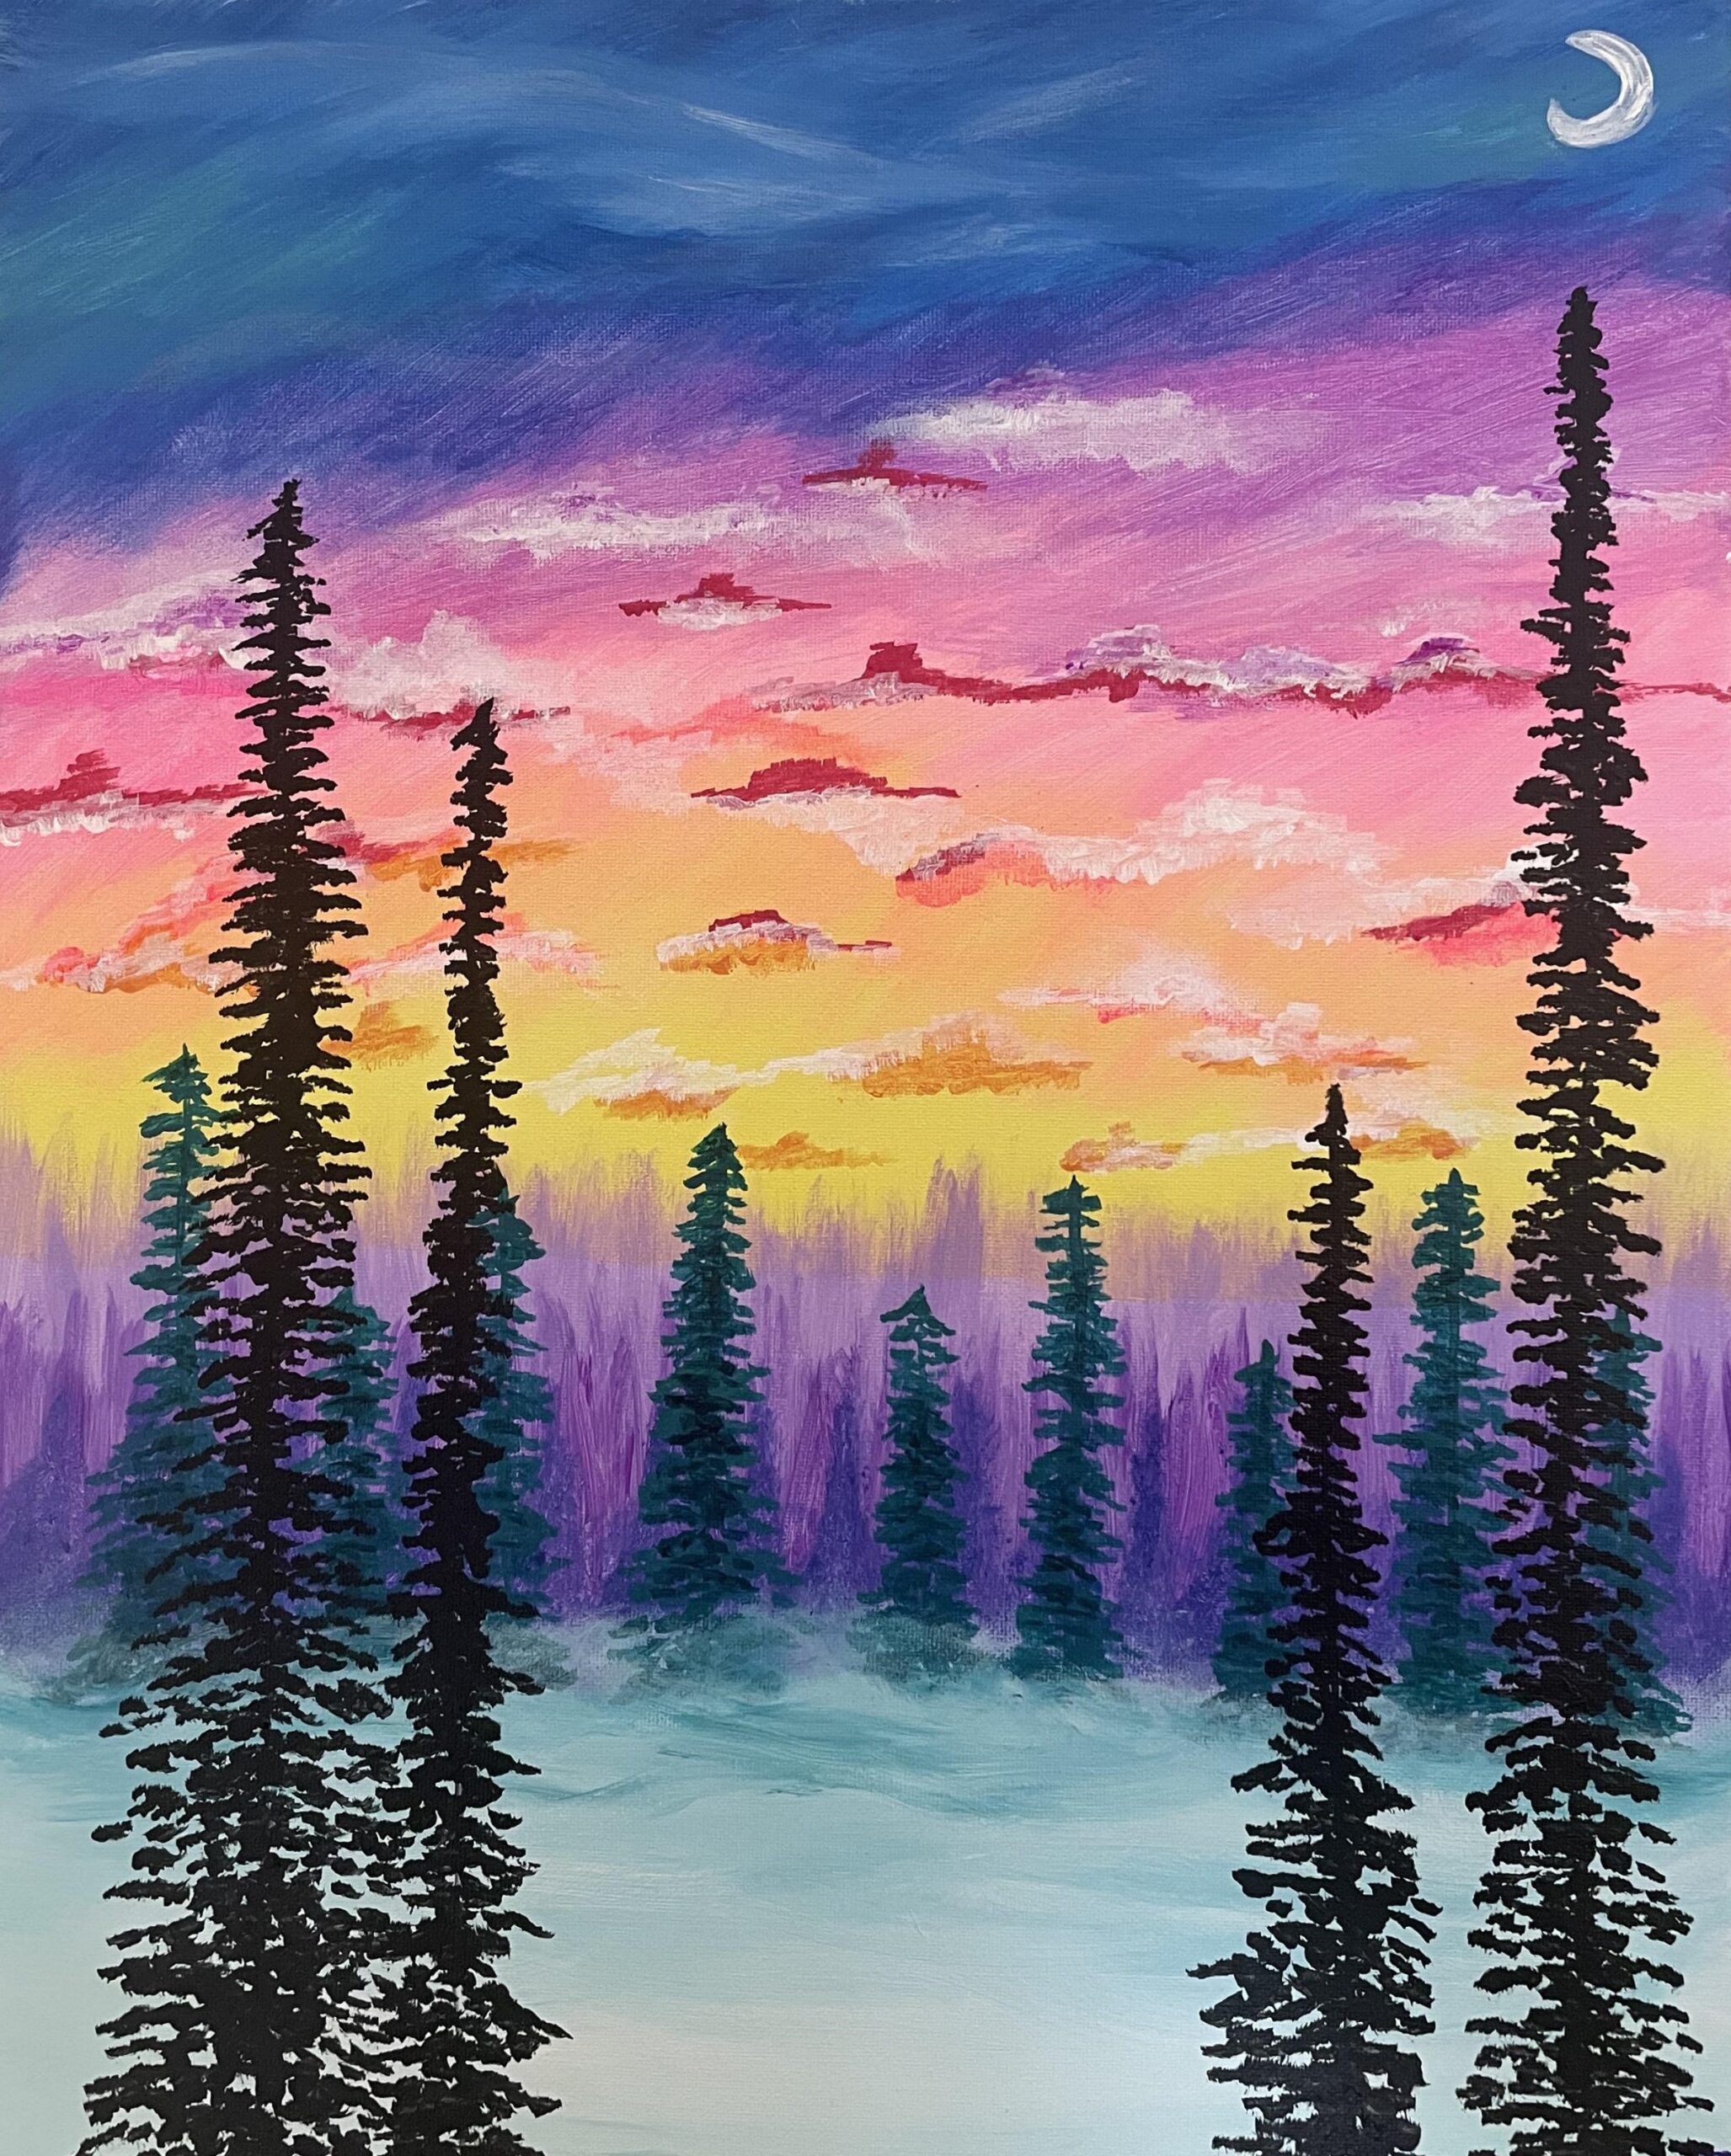 In-Studio Watercolour Paint Night - Rainbow in the Trees